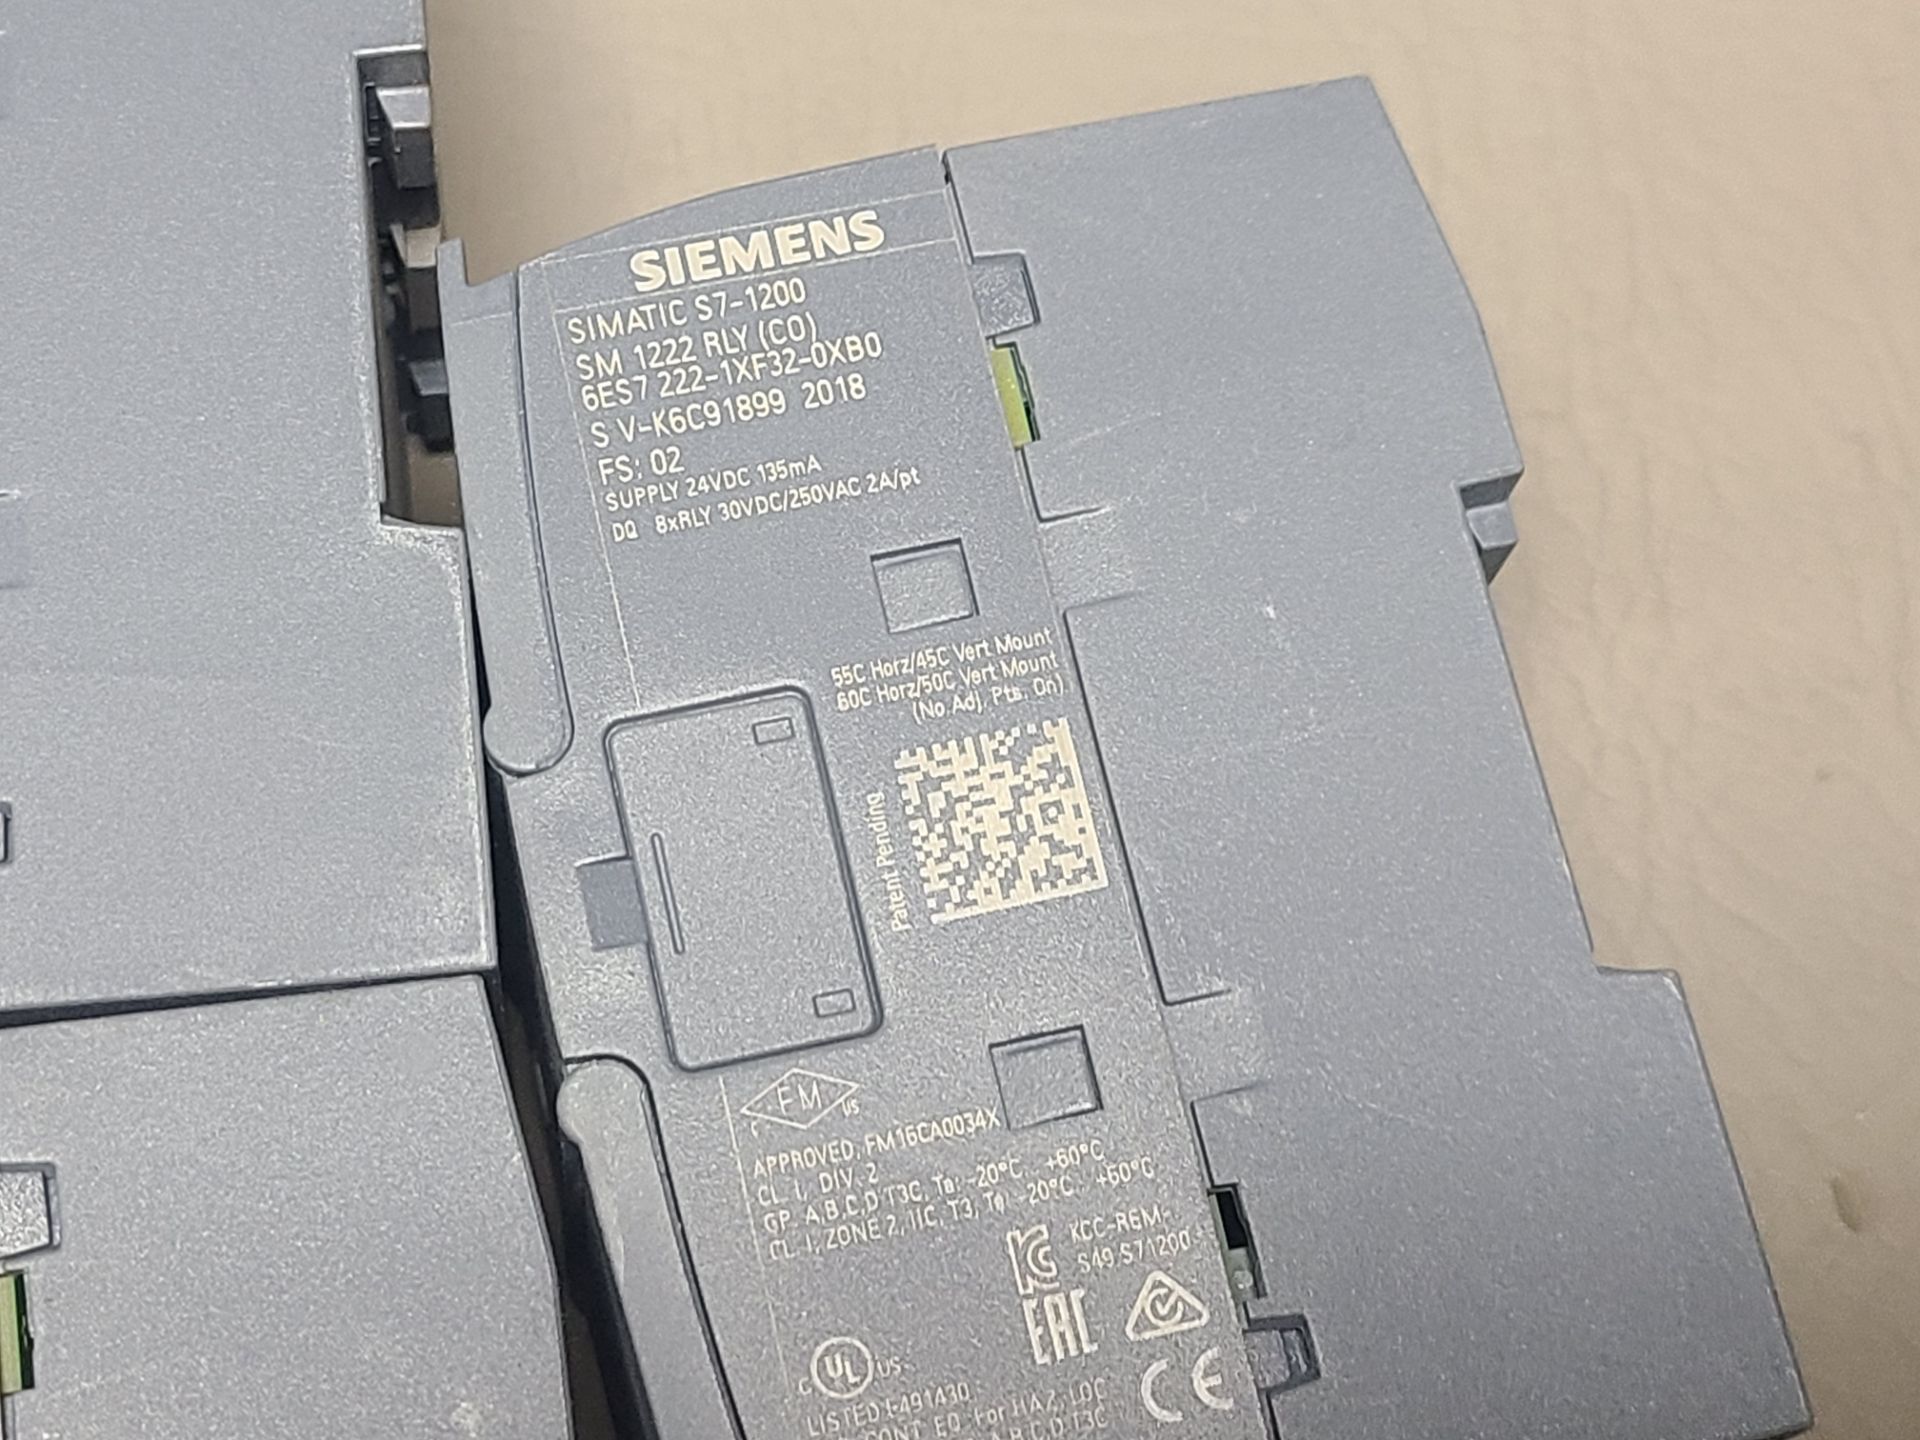 LOT OF SIEMENS S7-1200 DIGITAL OUTPUT PLC MODULES - Image 8 of 8